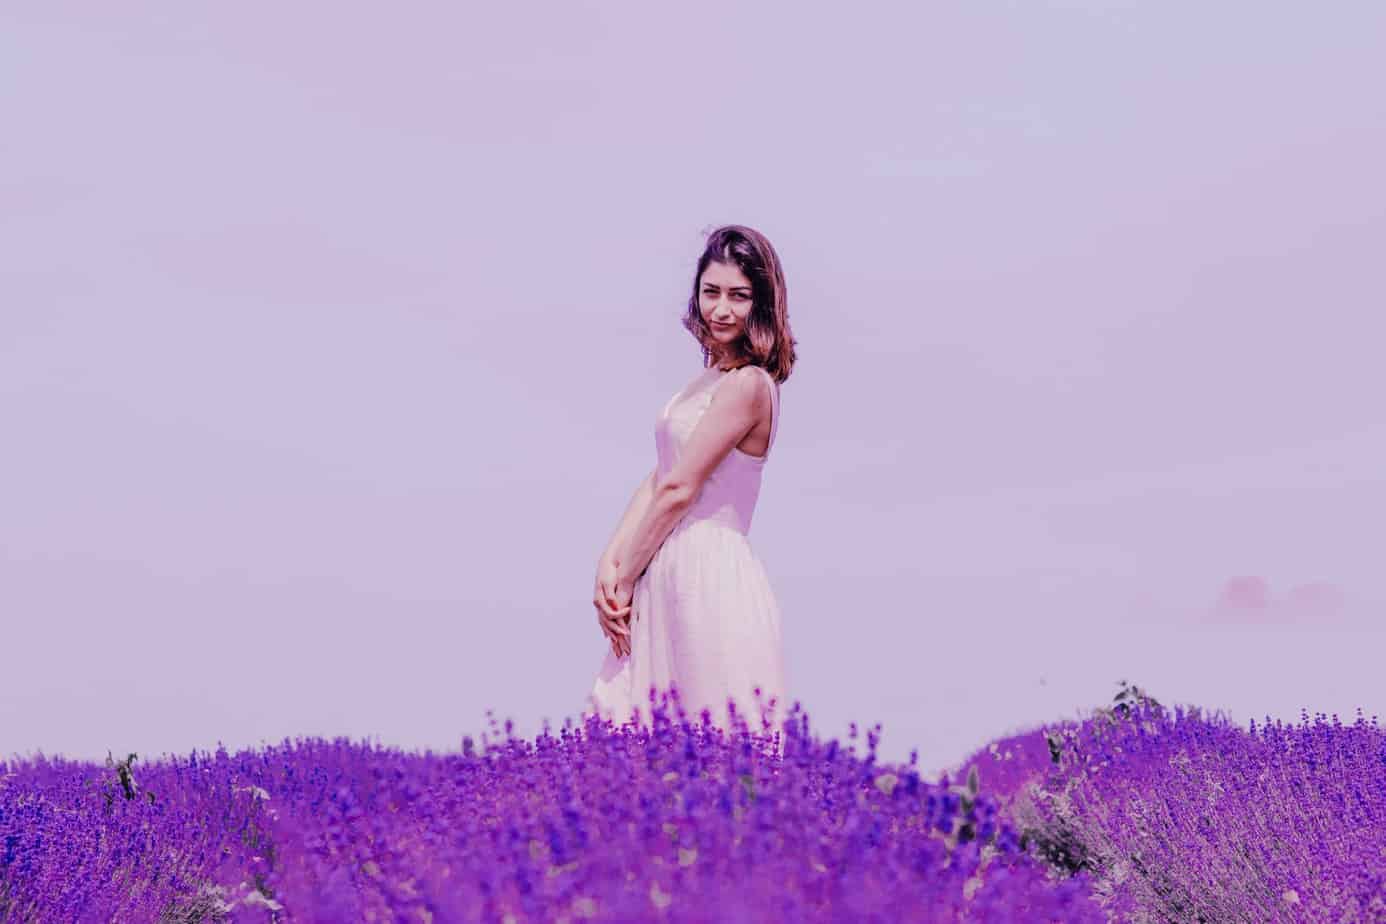 How To Wear Lilac Color: 19+ Lavender And Burgundy Outfit Ideas for 2022